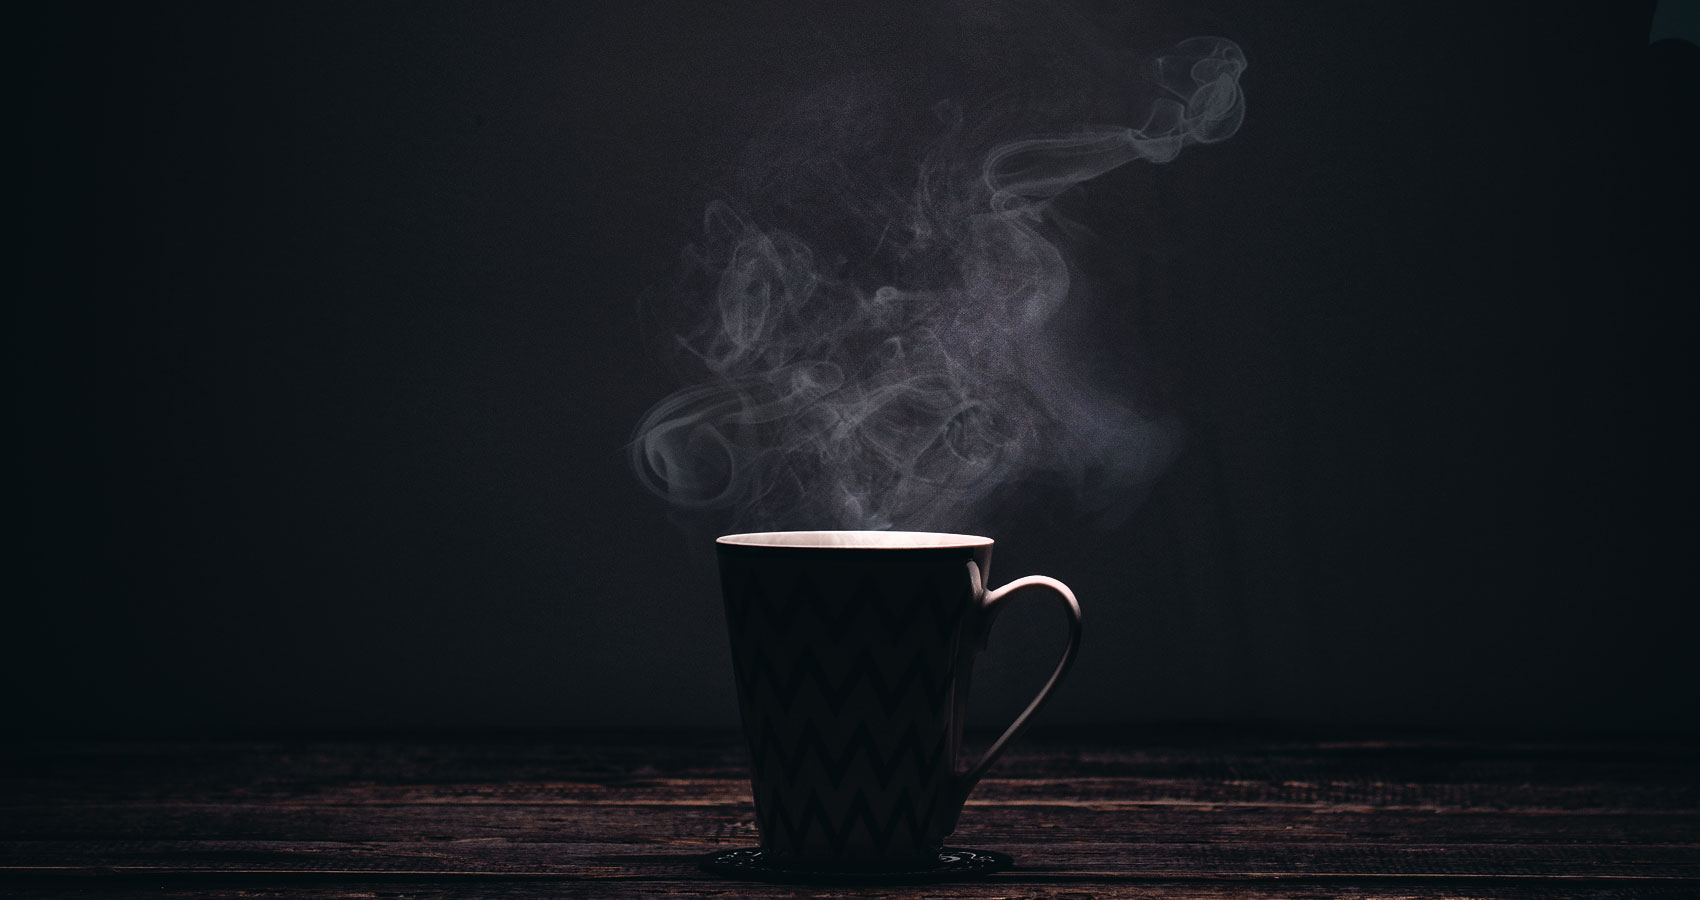 Coffee And Cigarettes written by Tony Ortiz at Spillwords.com